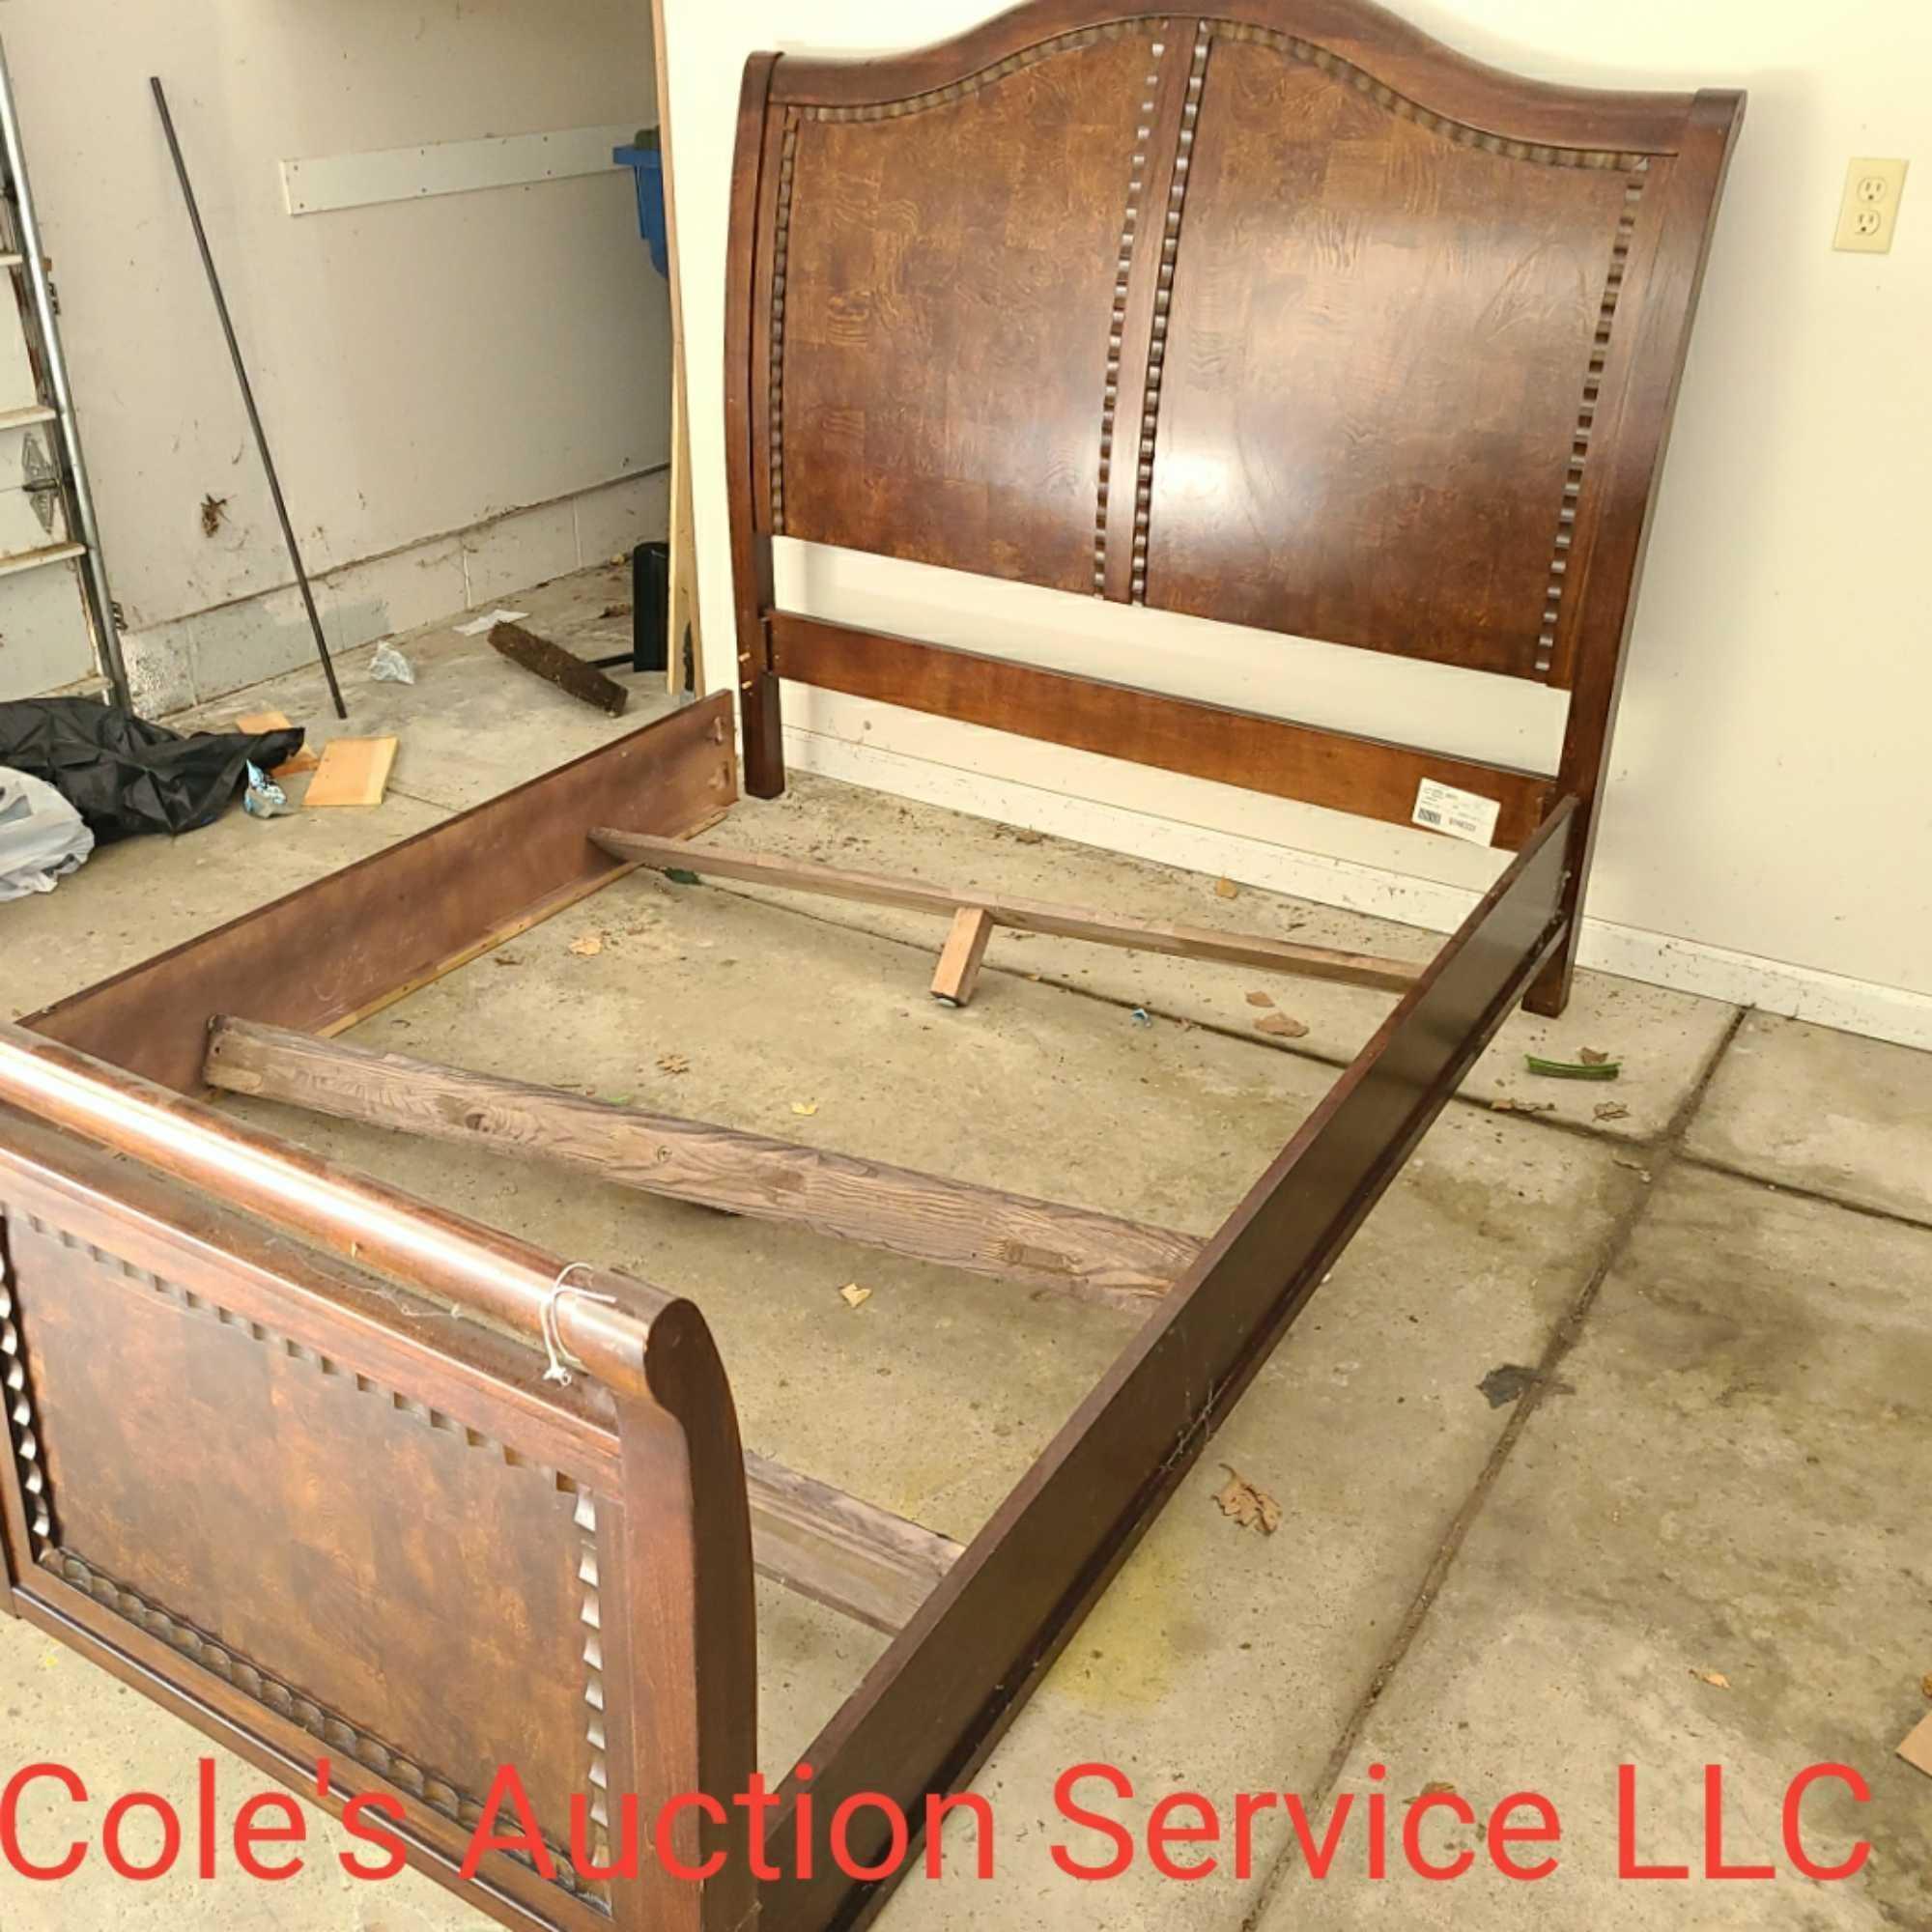 Queen-size sleigh bed in good condition. See photos for details.